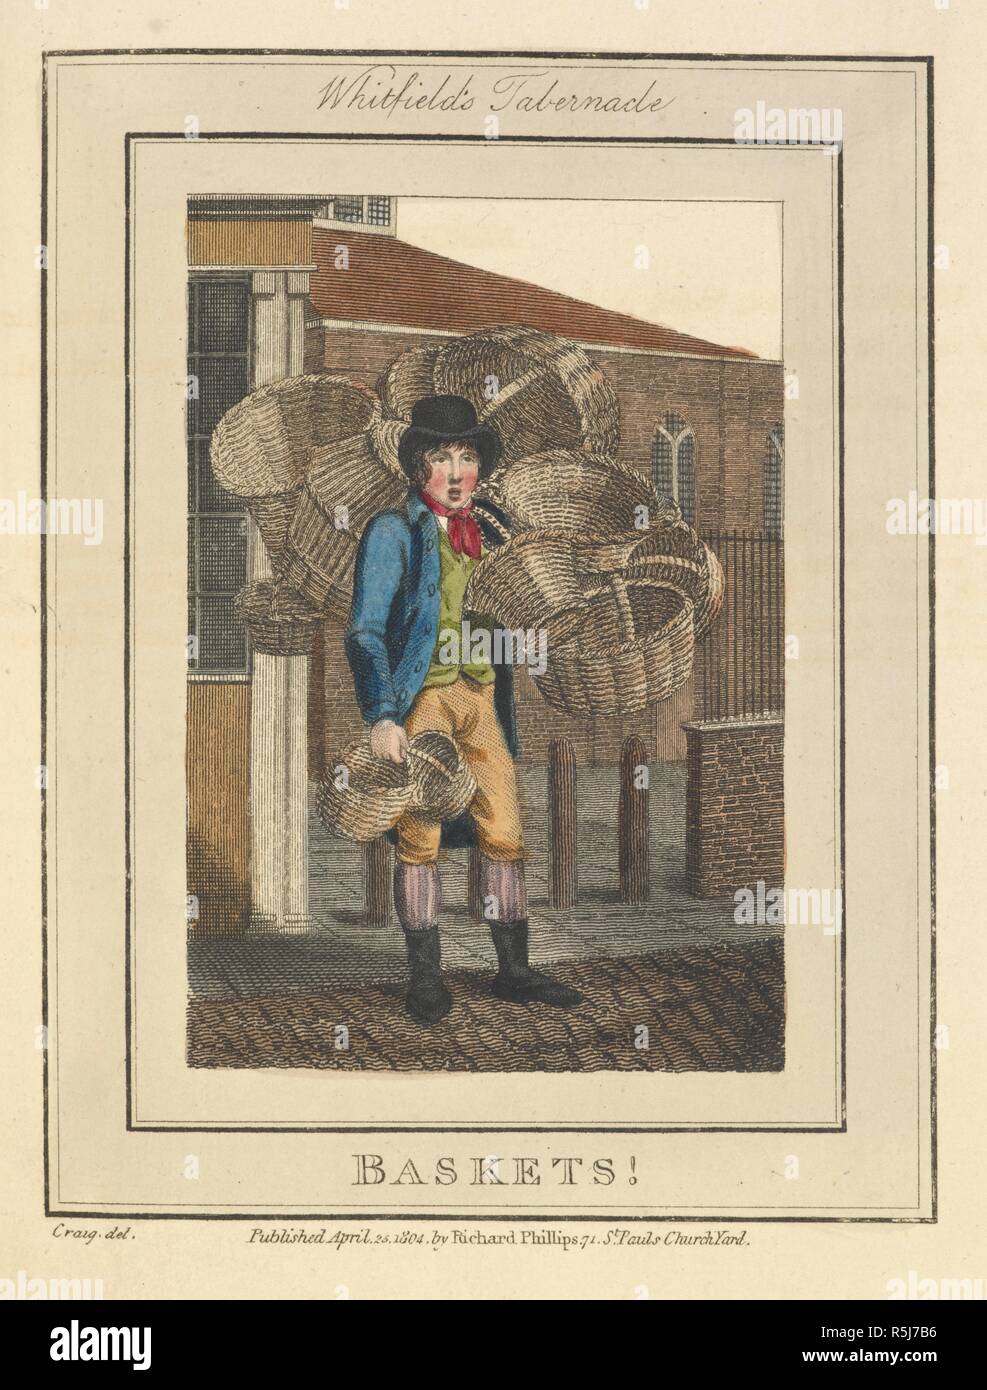 Baskets. Whitfields Tabernacle. Modern London; being the history and present state of the British Metropolis. Illustrated with numerous copper plates. [By Richard Phillips.]. London : Richard Phillips, 1804. Source: 10349.h.13 plate 3. Stock Photo